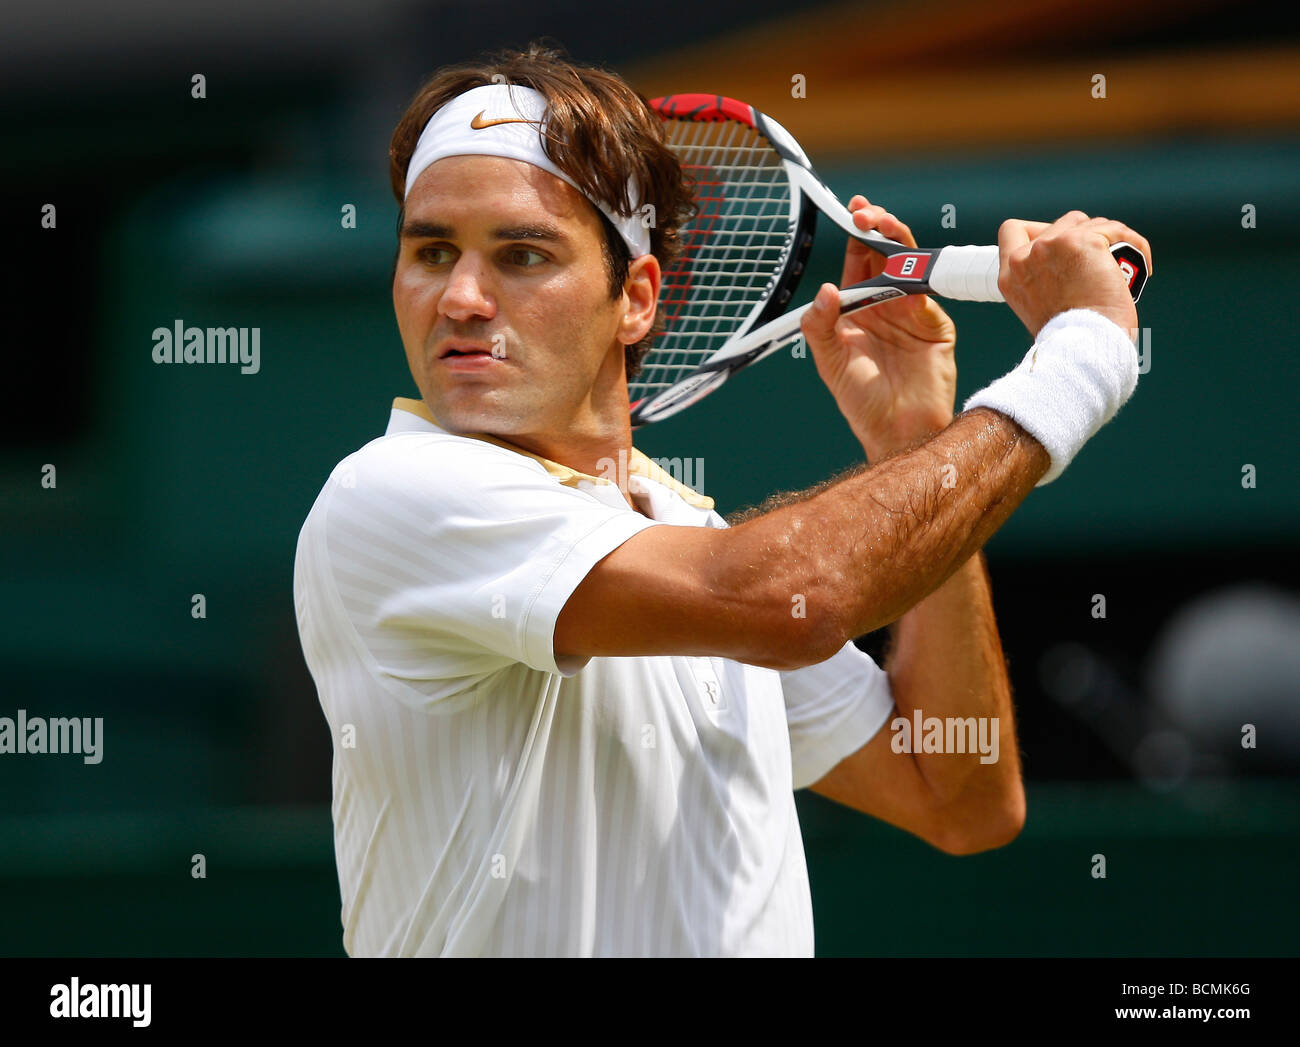 Wimbledon Championships 2009, Roger Federer SUI in Aktion Stockfoto